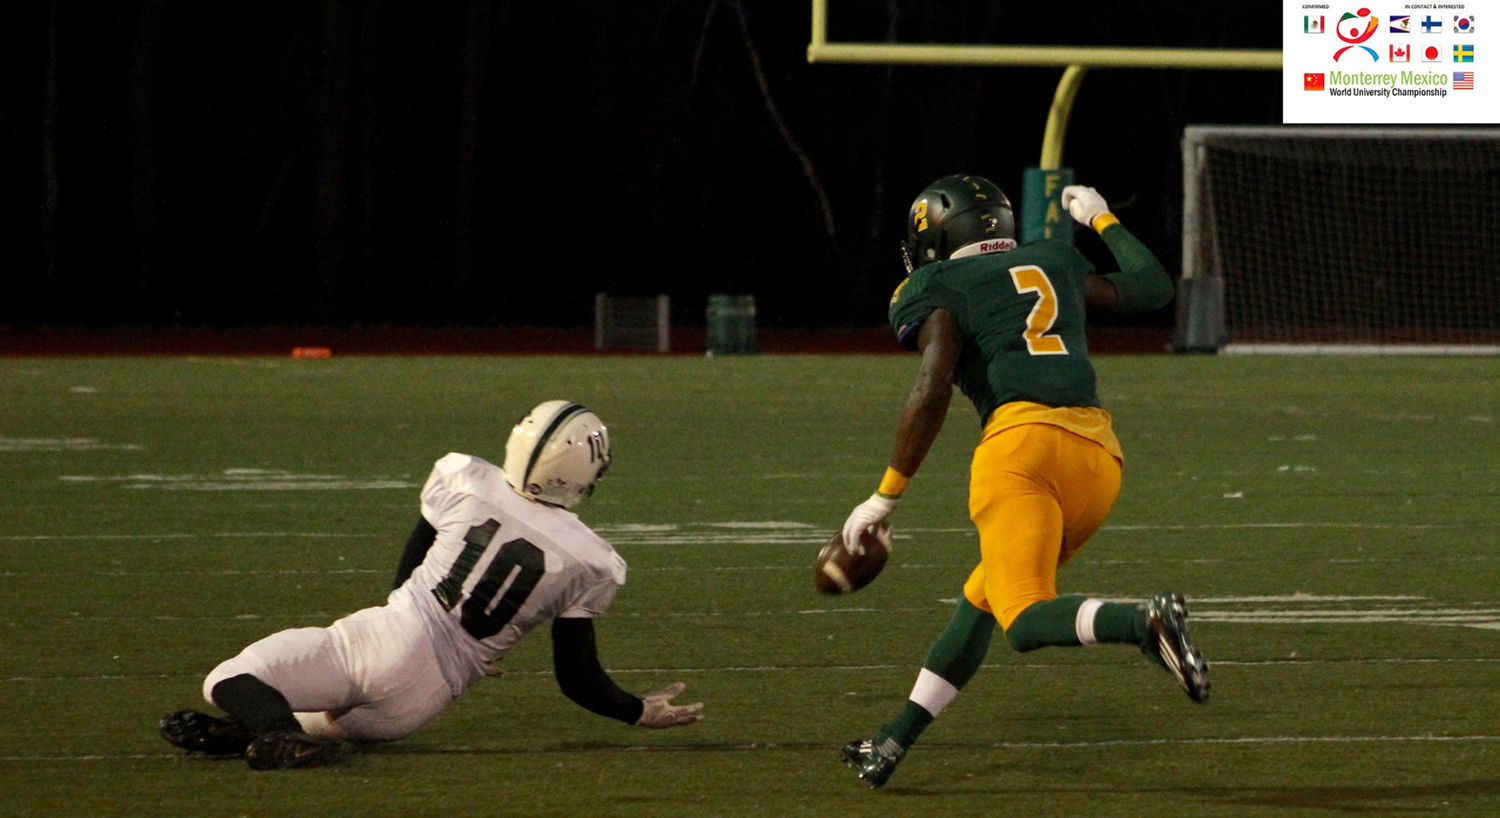 Seaforth-Howard To Represent Fitchburg State At World University Football Championships